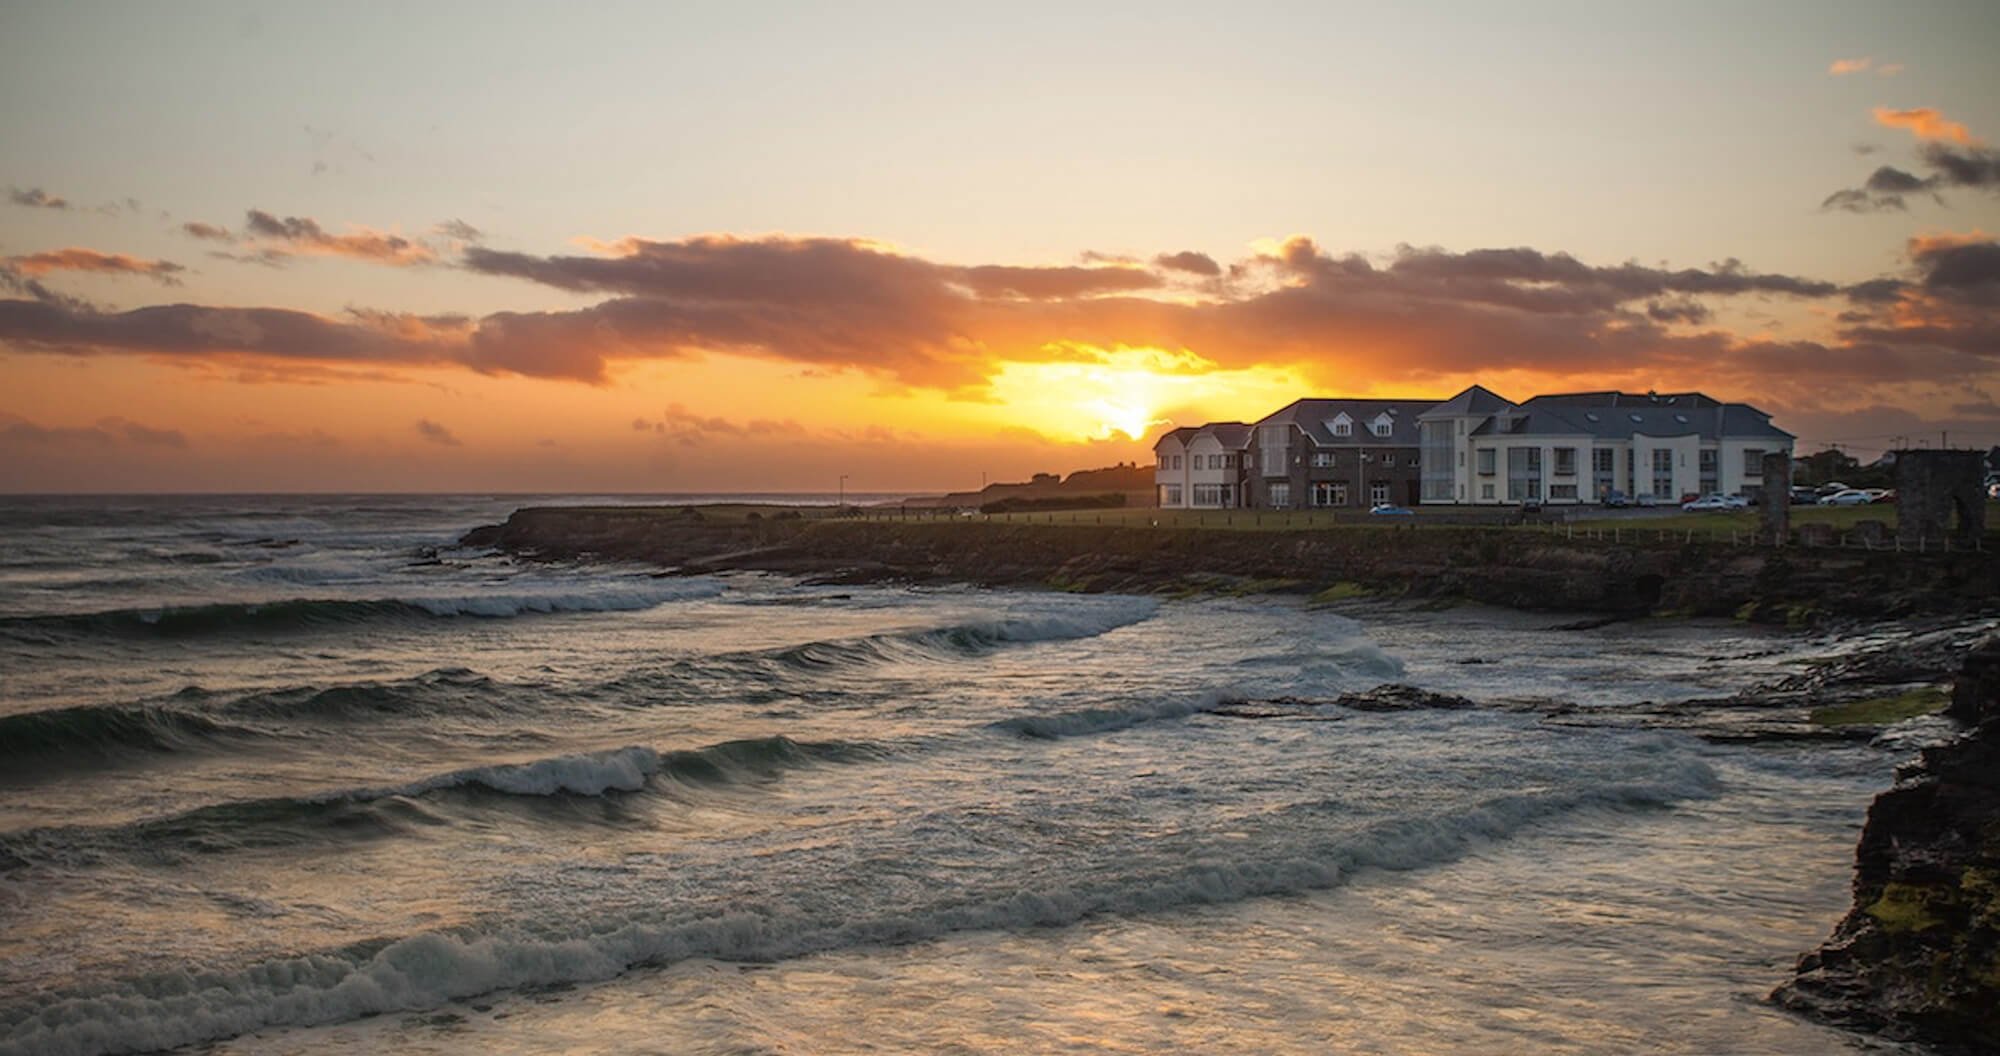 Sunset over the Armada Hotel beside waves at Spanish Point beach in Ireland